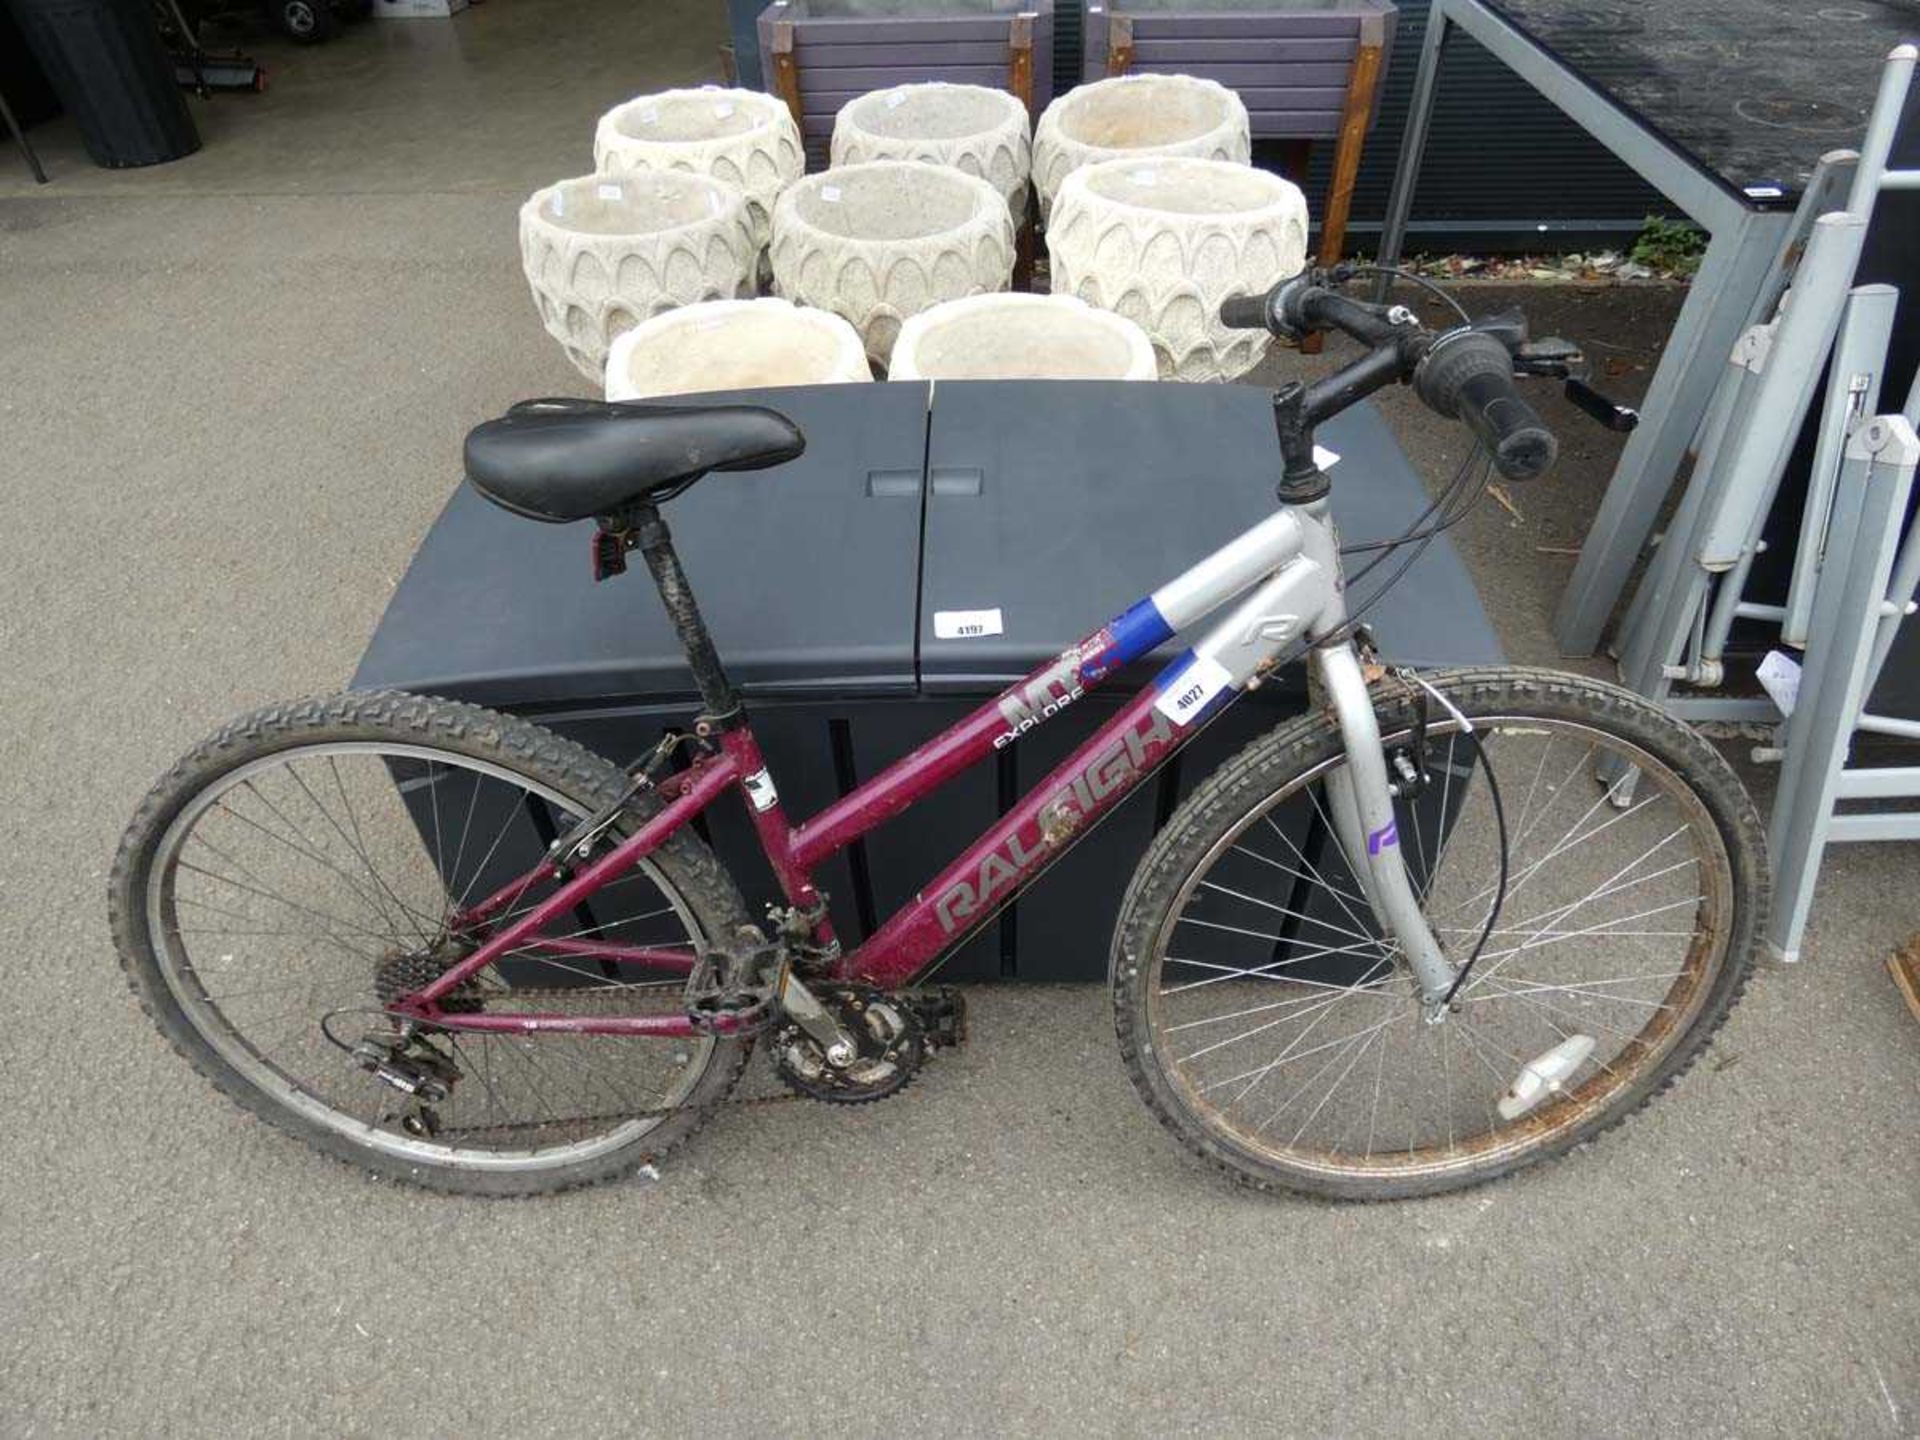 Raleigh mountain bike in purple and silver